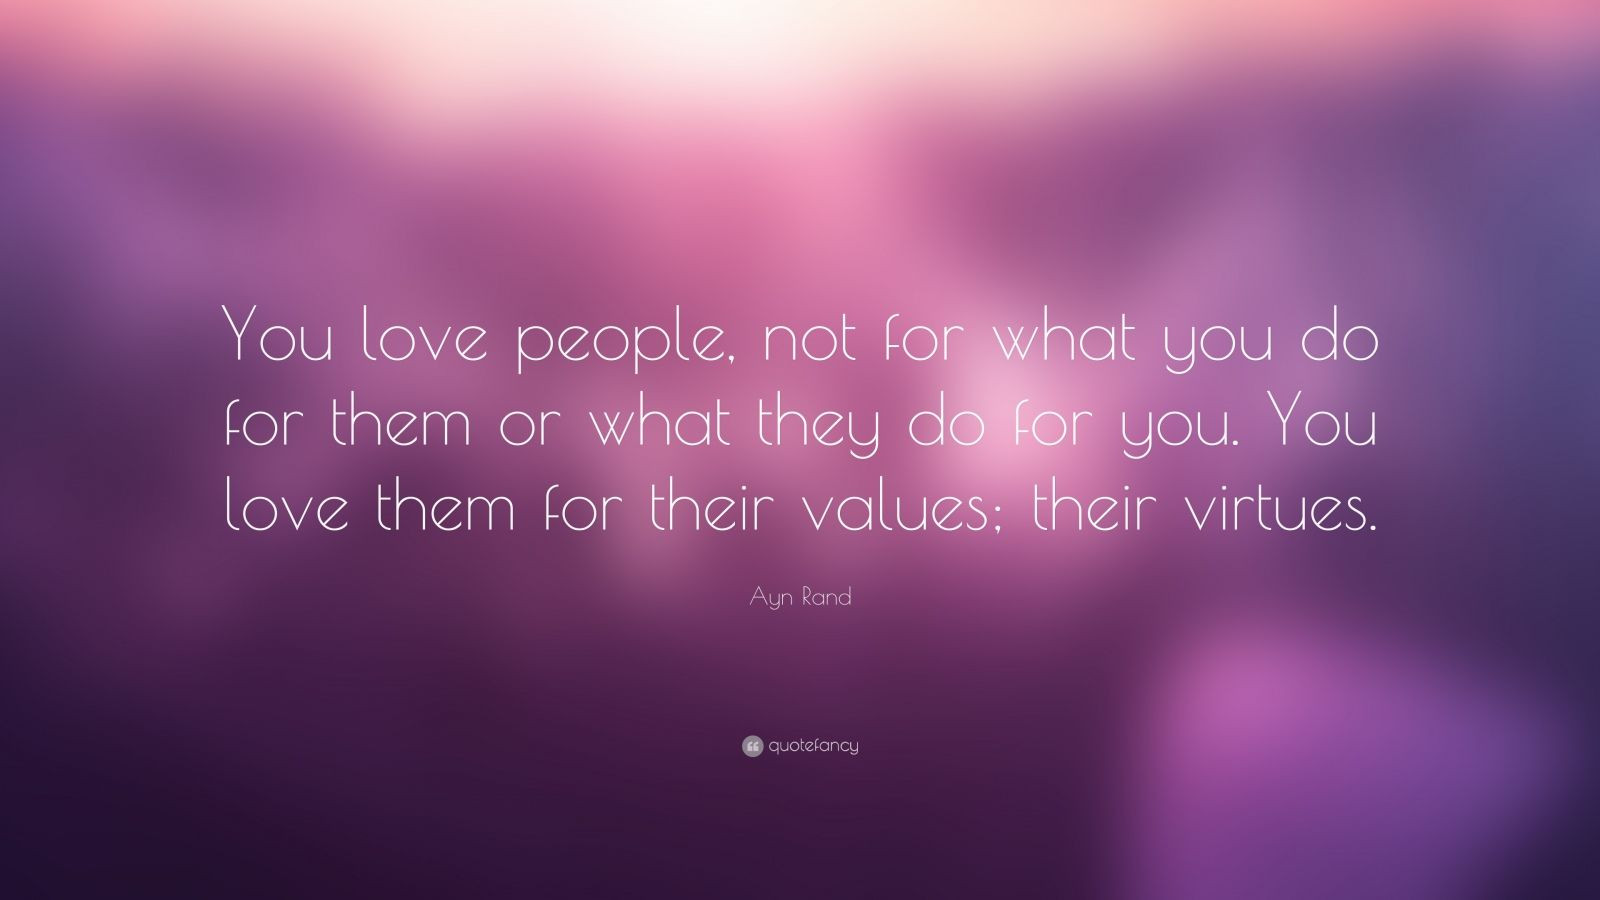 Ayn Rand Love Quotes
 Ayn Rand Quote “You love people not for what you do for